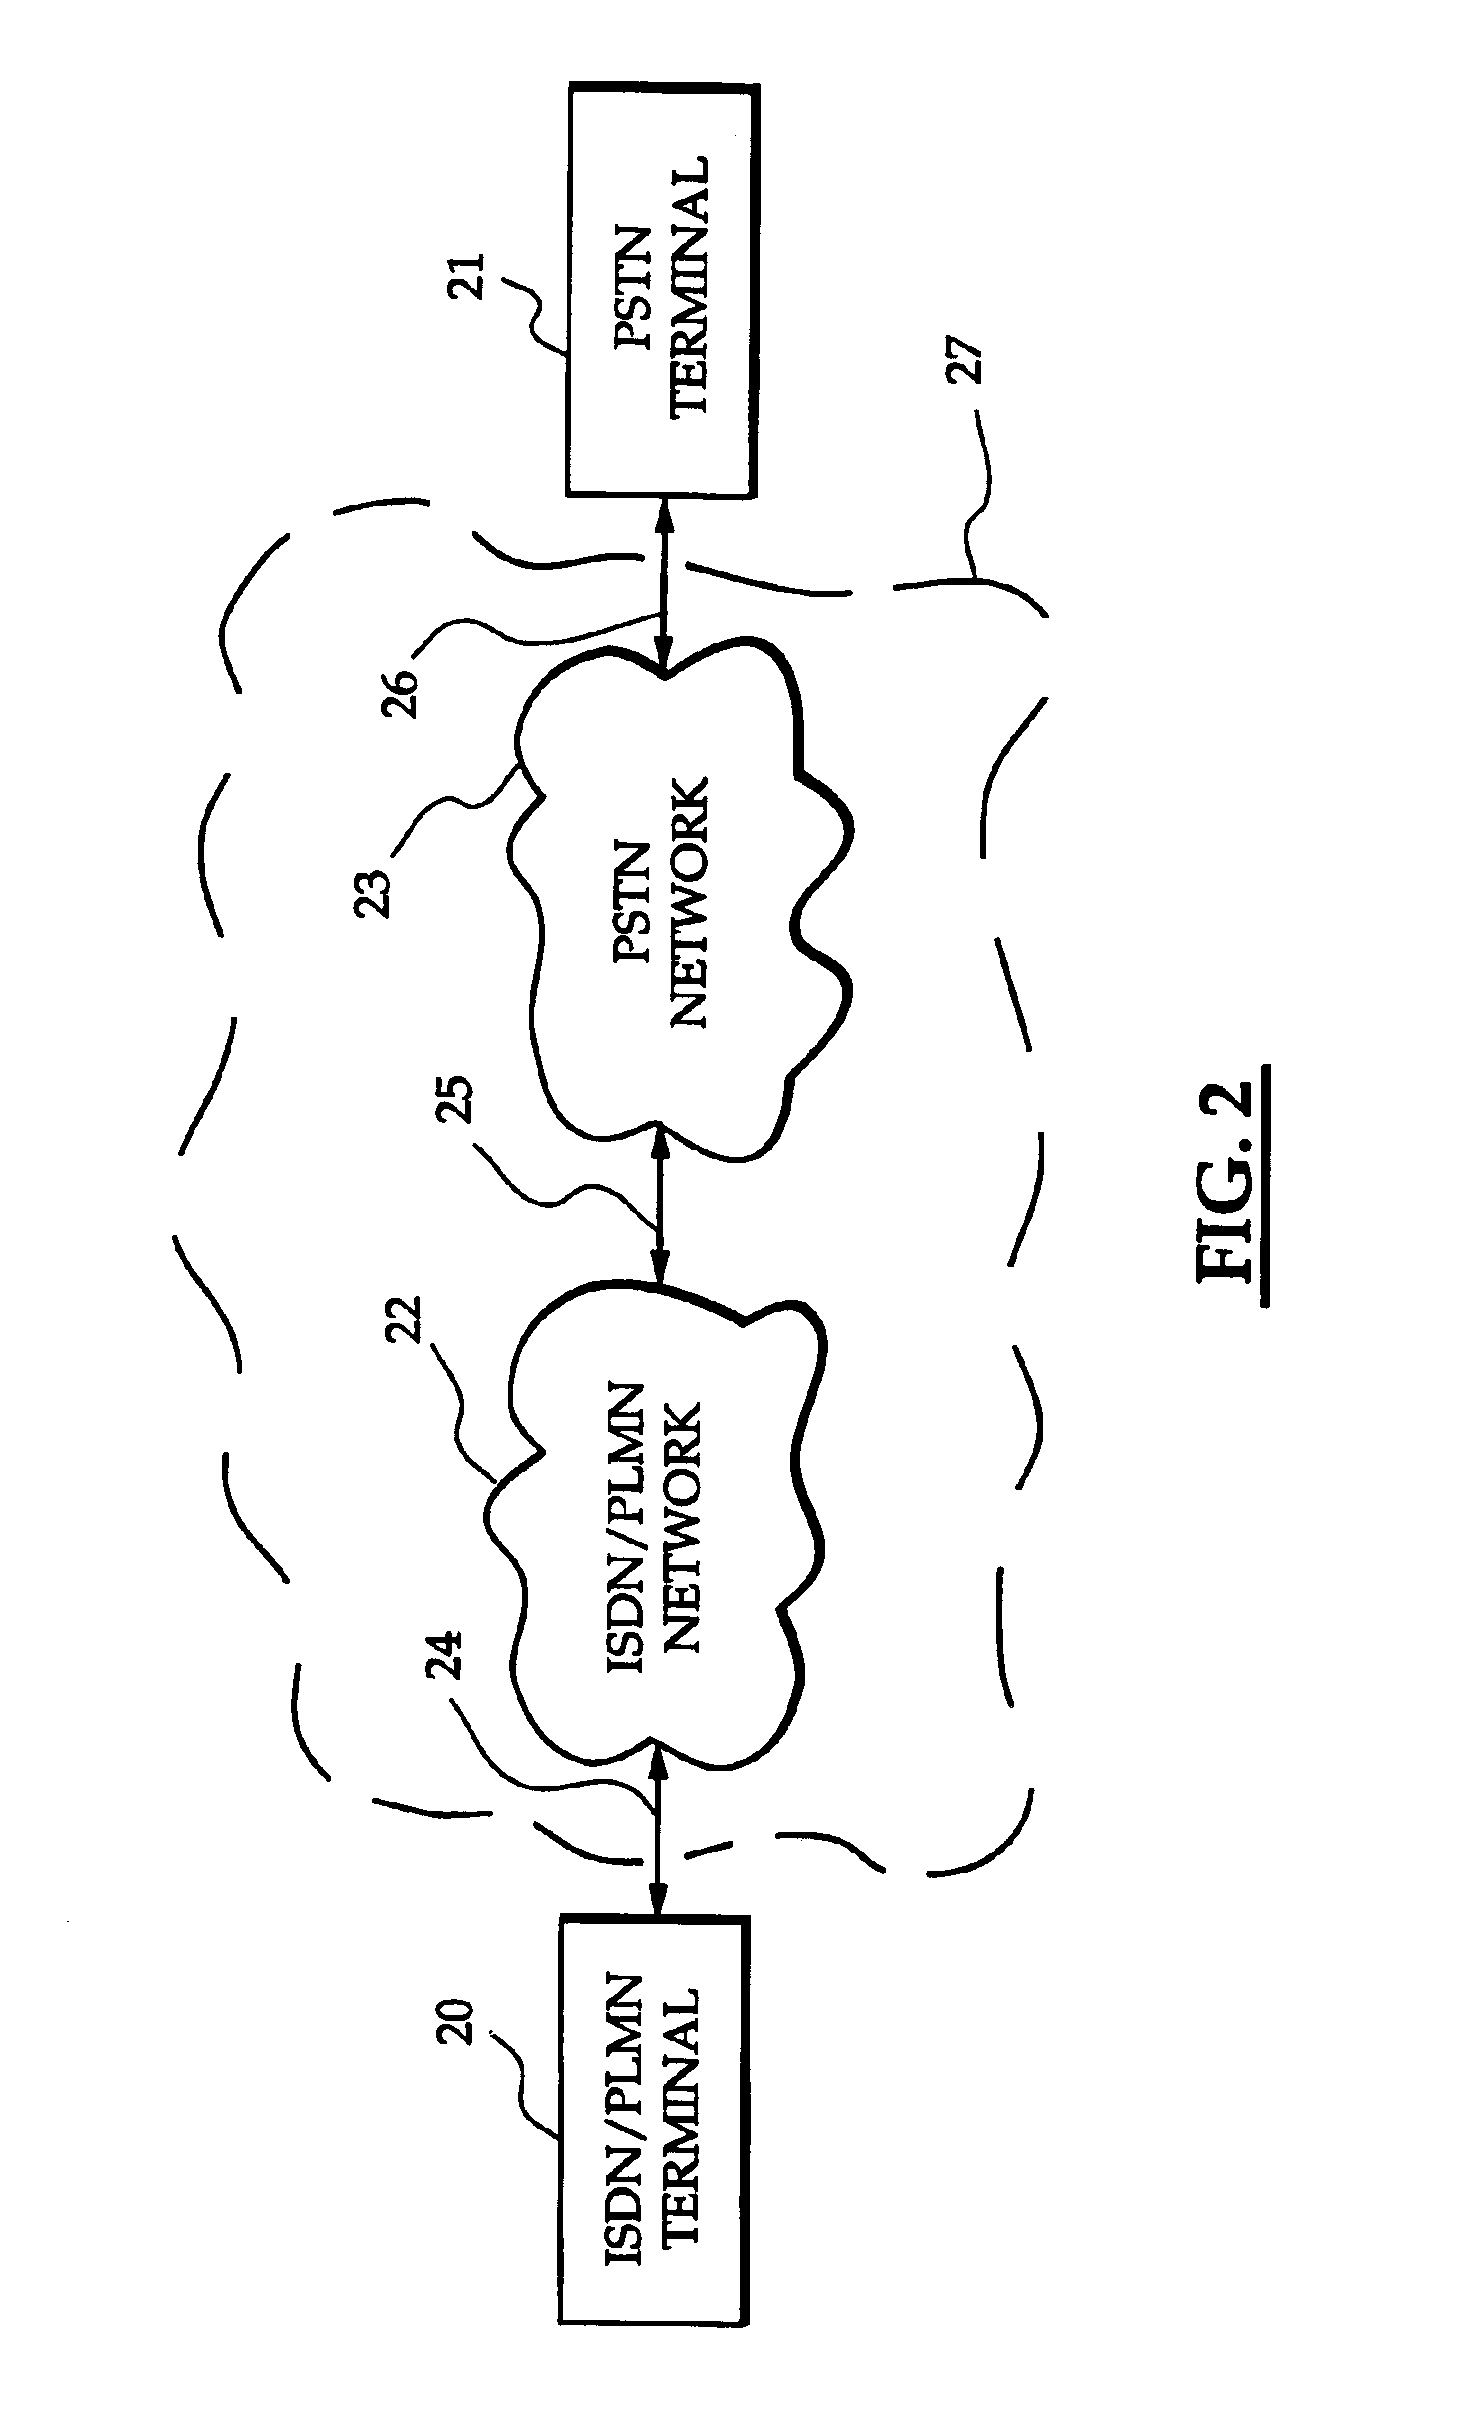 Method for establishing a call in the presence of outband indication of PSTN involvement at multimedia call setup